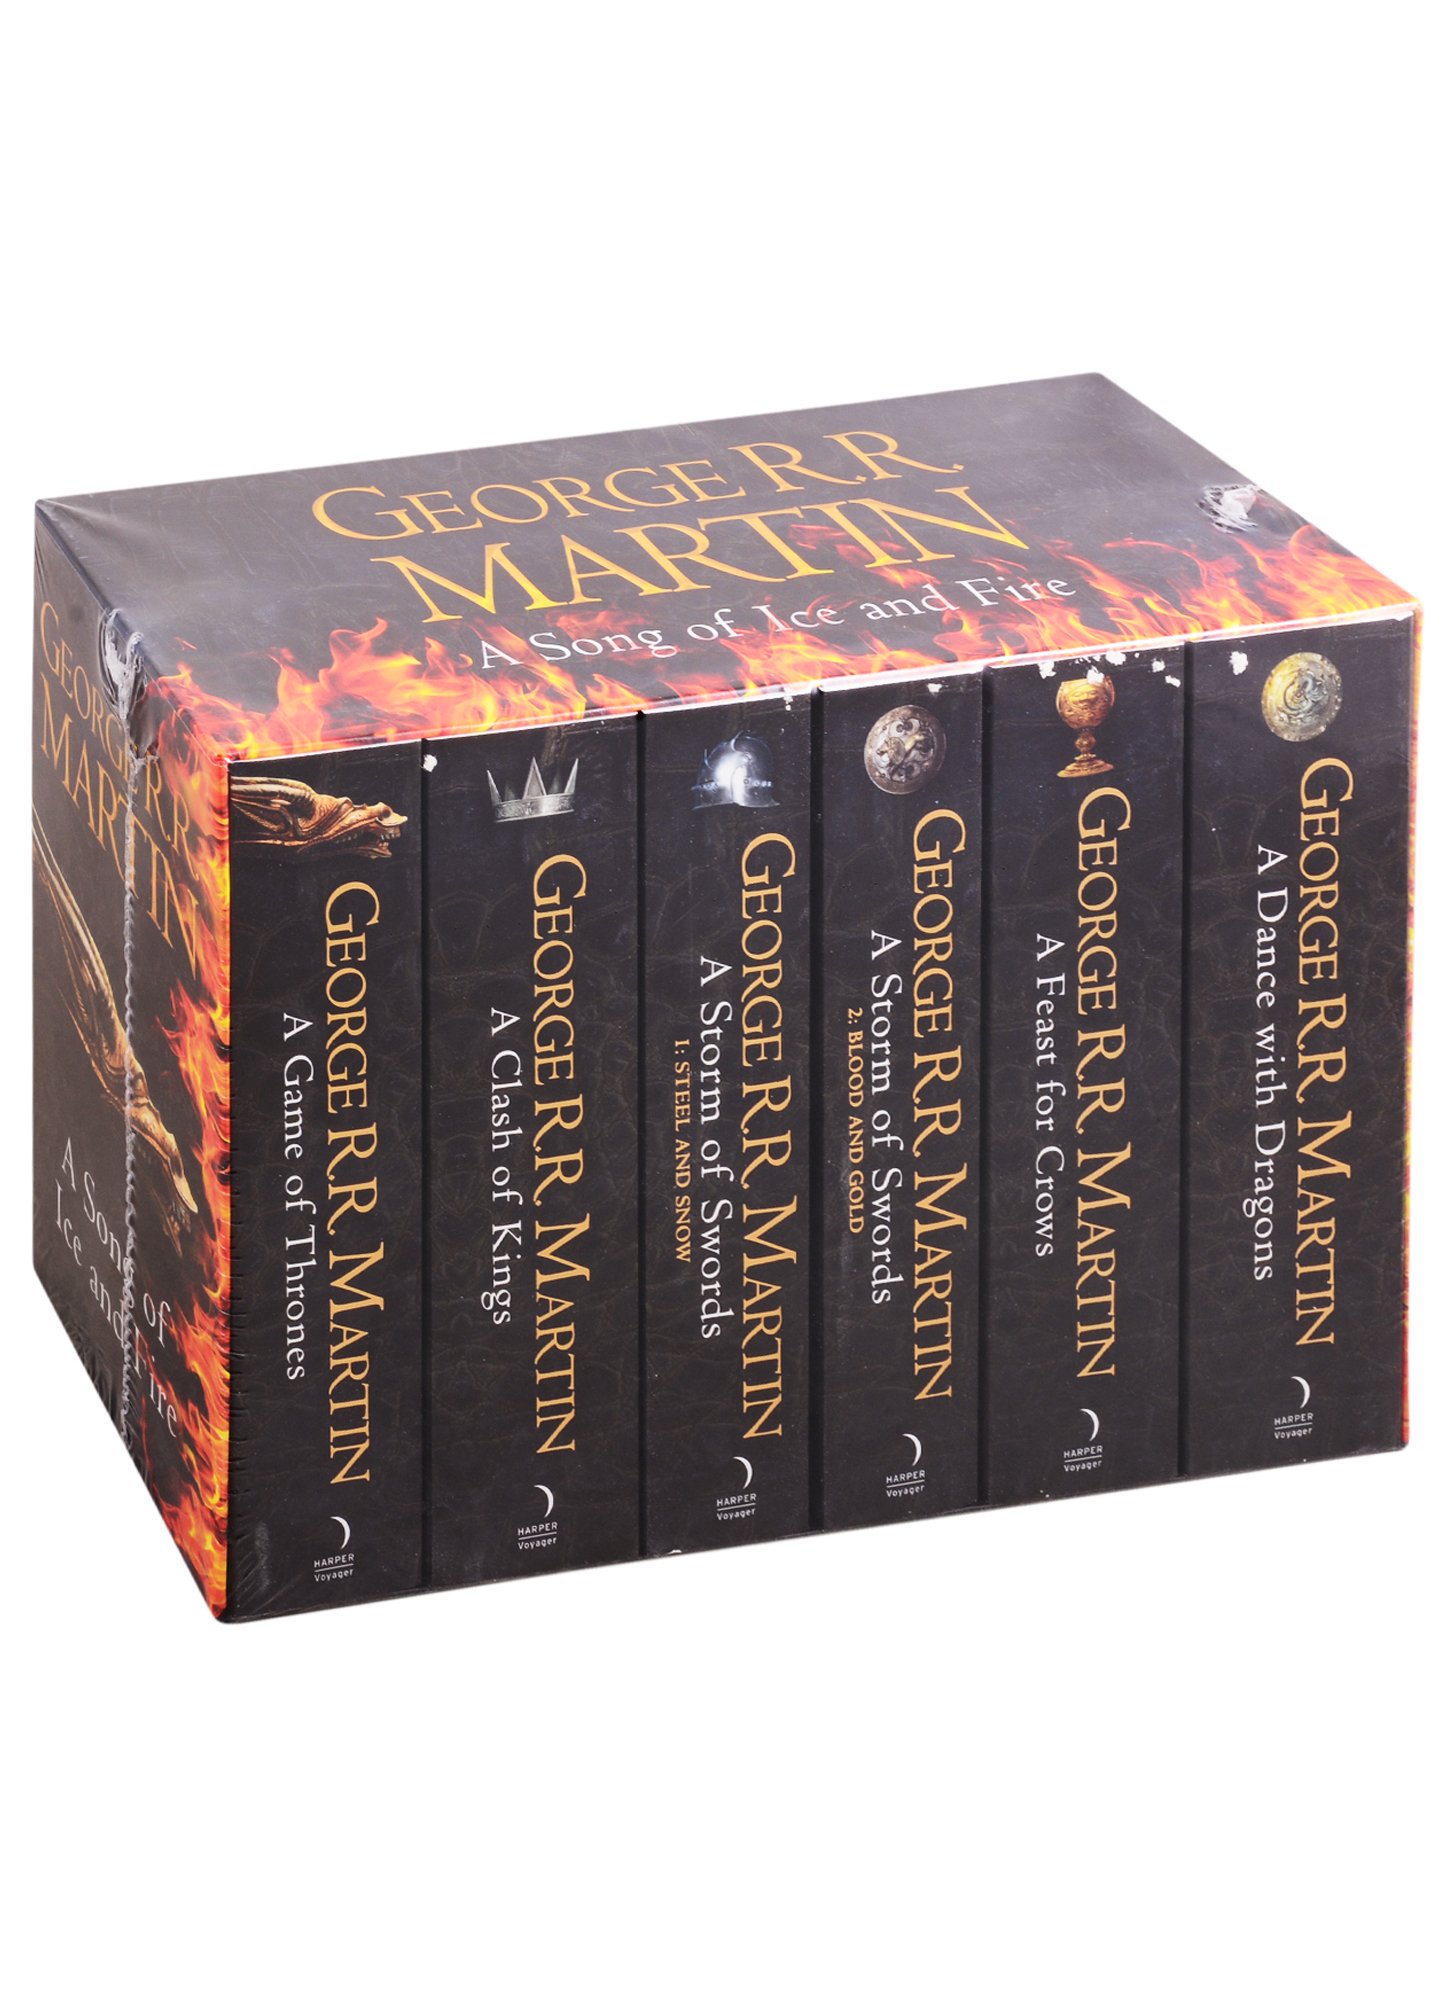 Martin George Raymond Richard Song of Ice and Fire-Game of Thrones: The complete box set of all 6 books Martin George R. R. the great wall through time a 2 700 year journey along the world s greatest wall